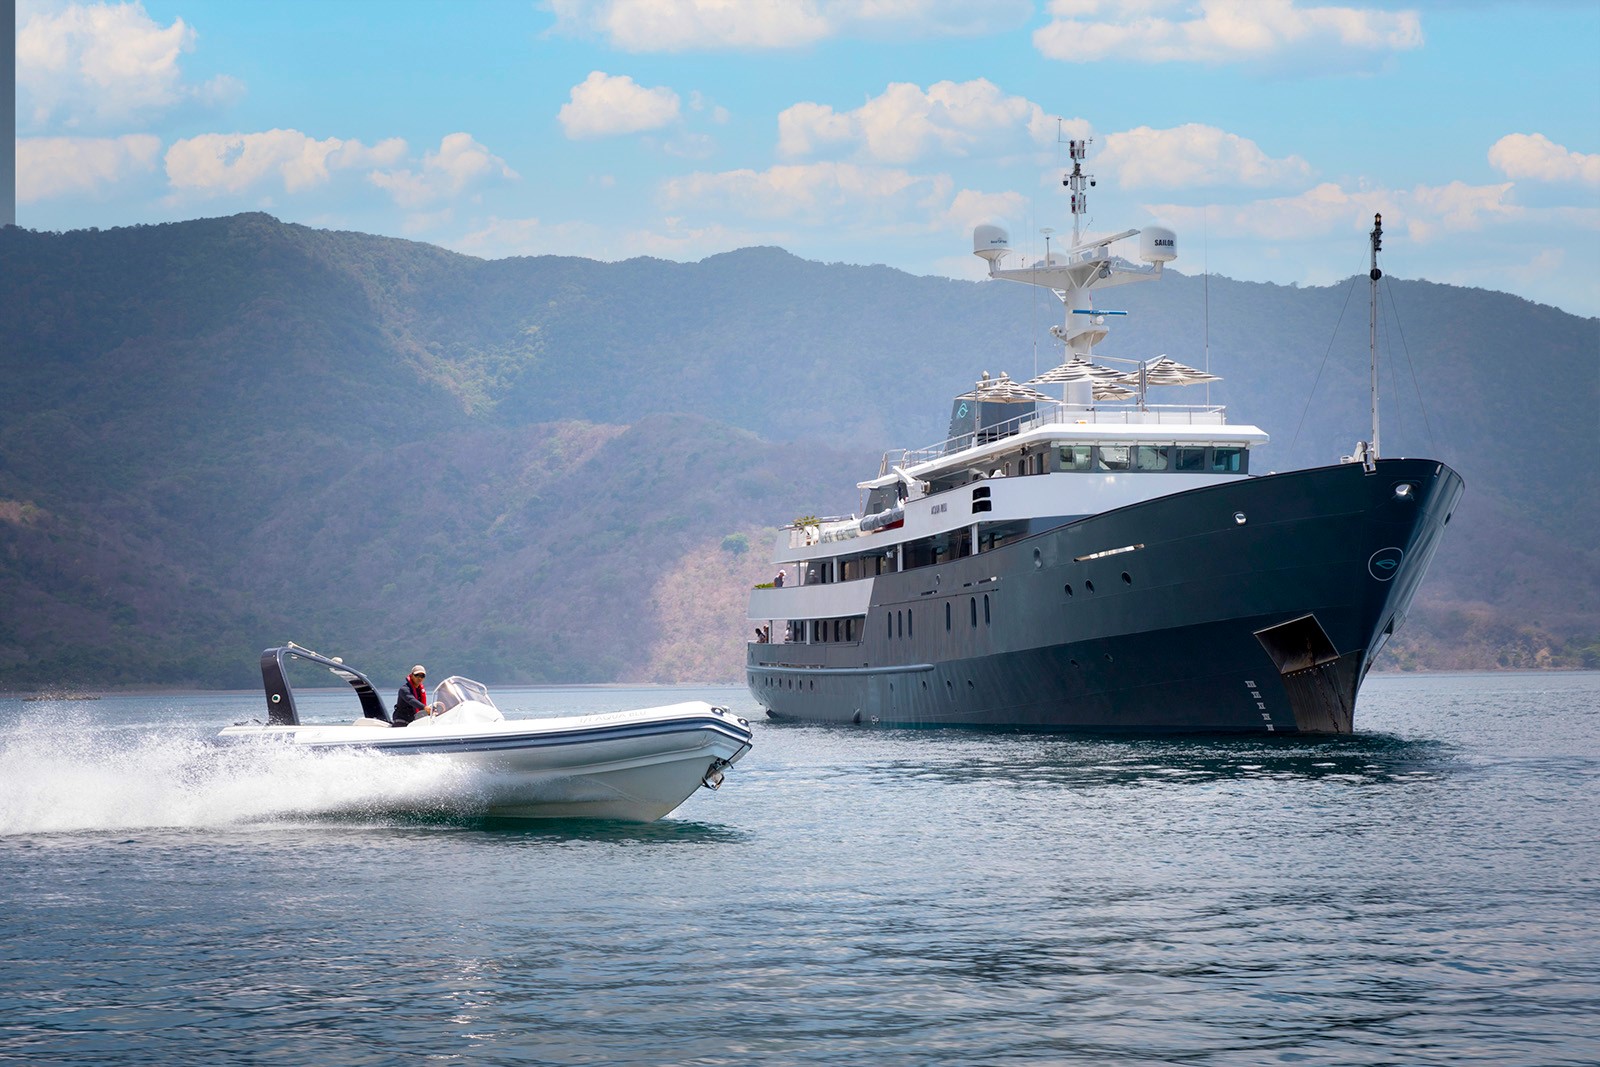 Exterior view of Aqua Blu and one of its skiffs in Indonesia